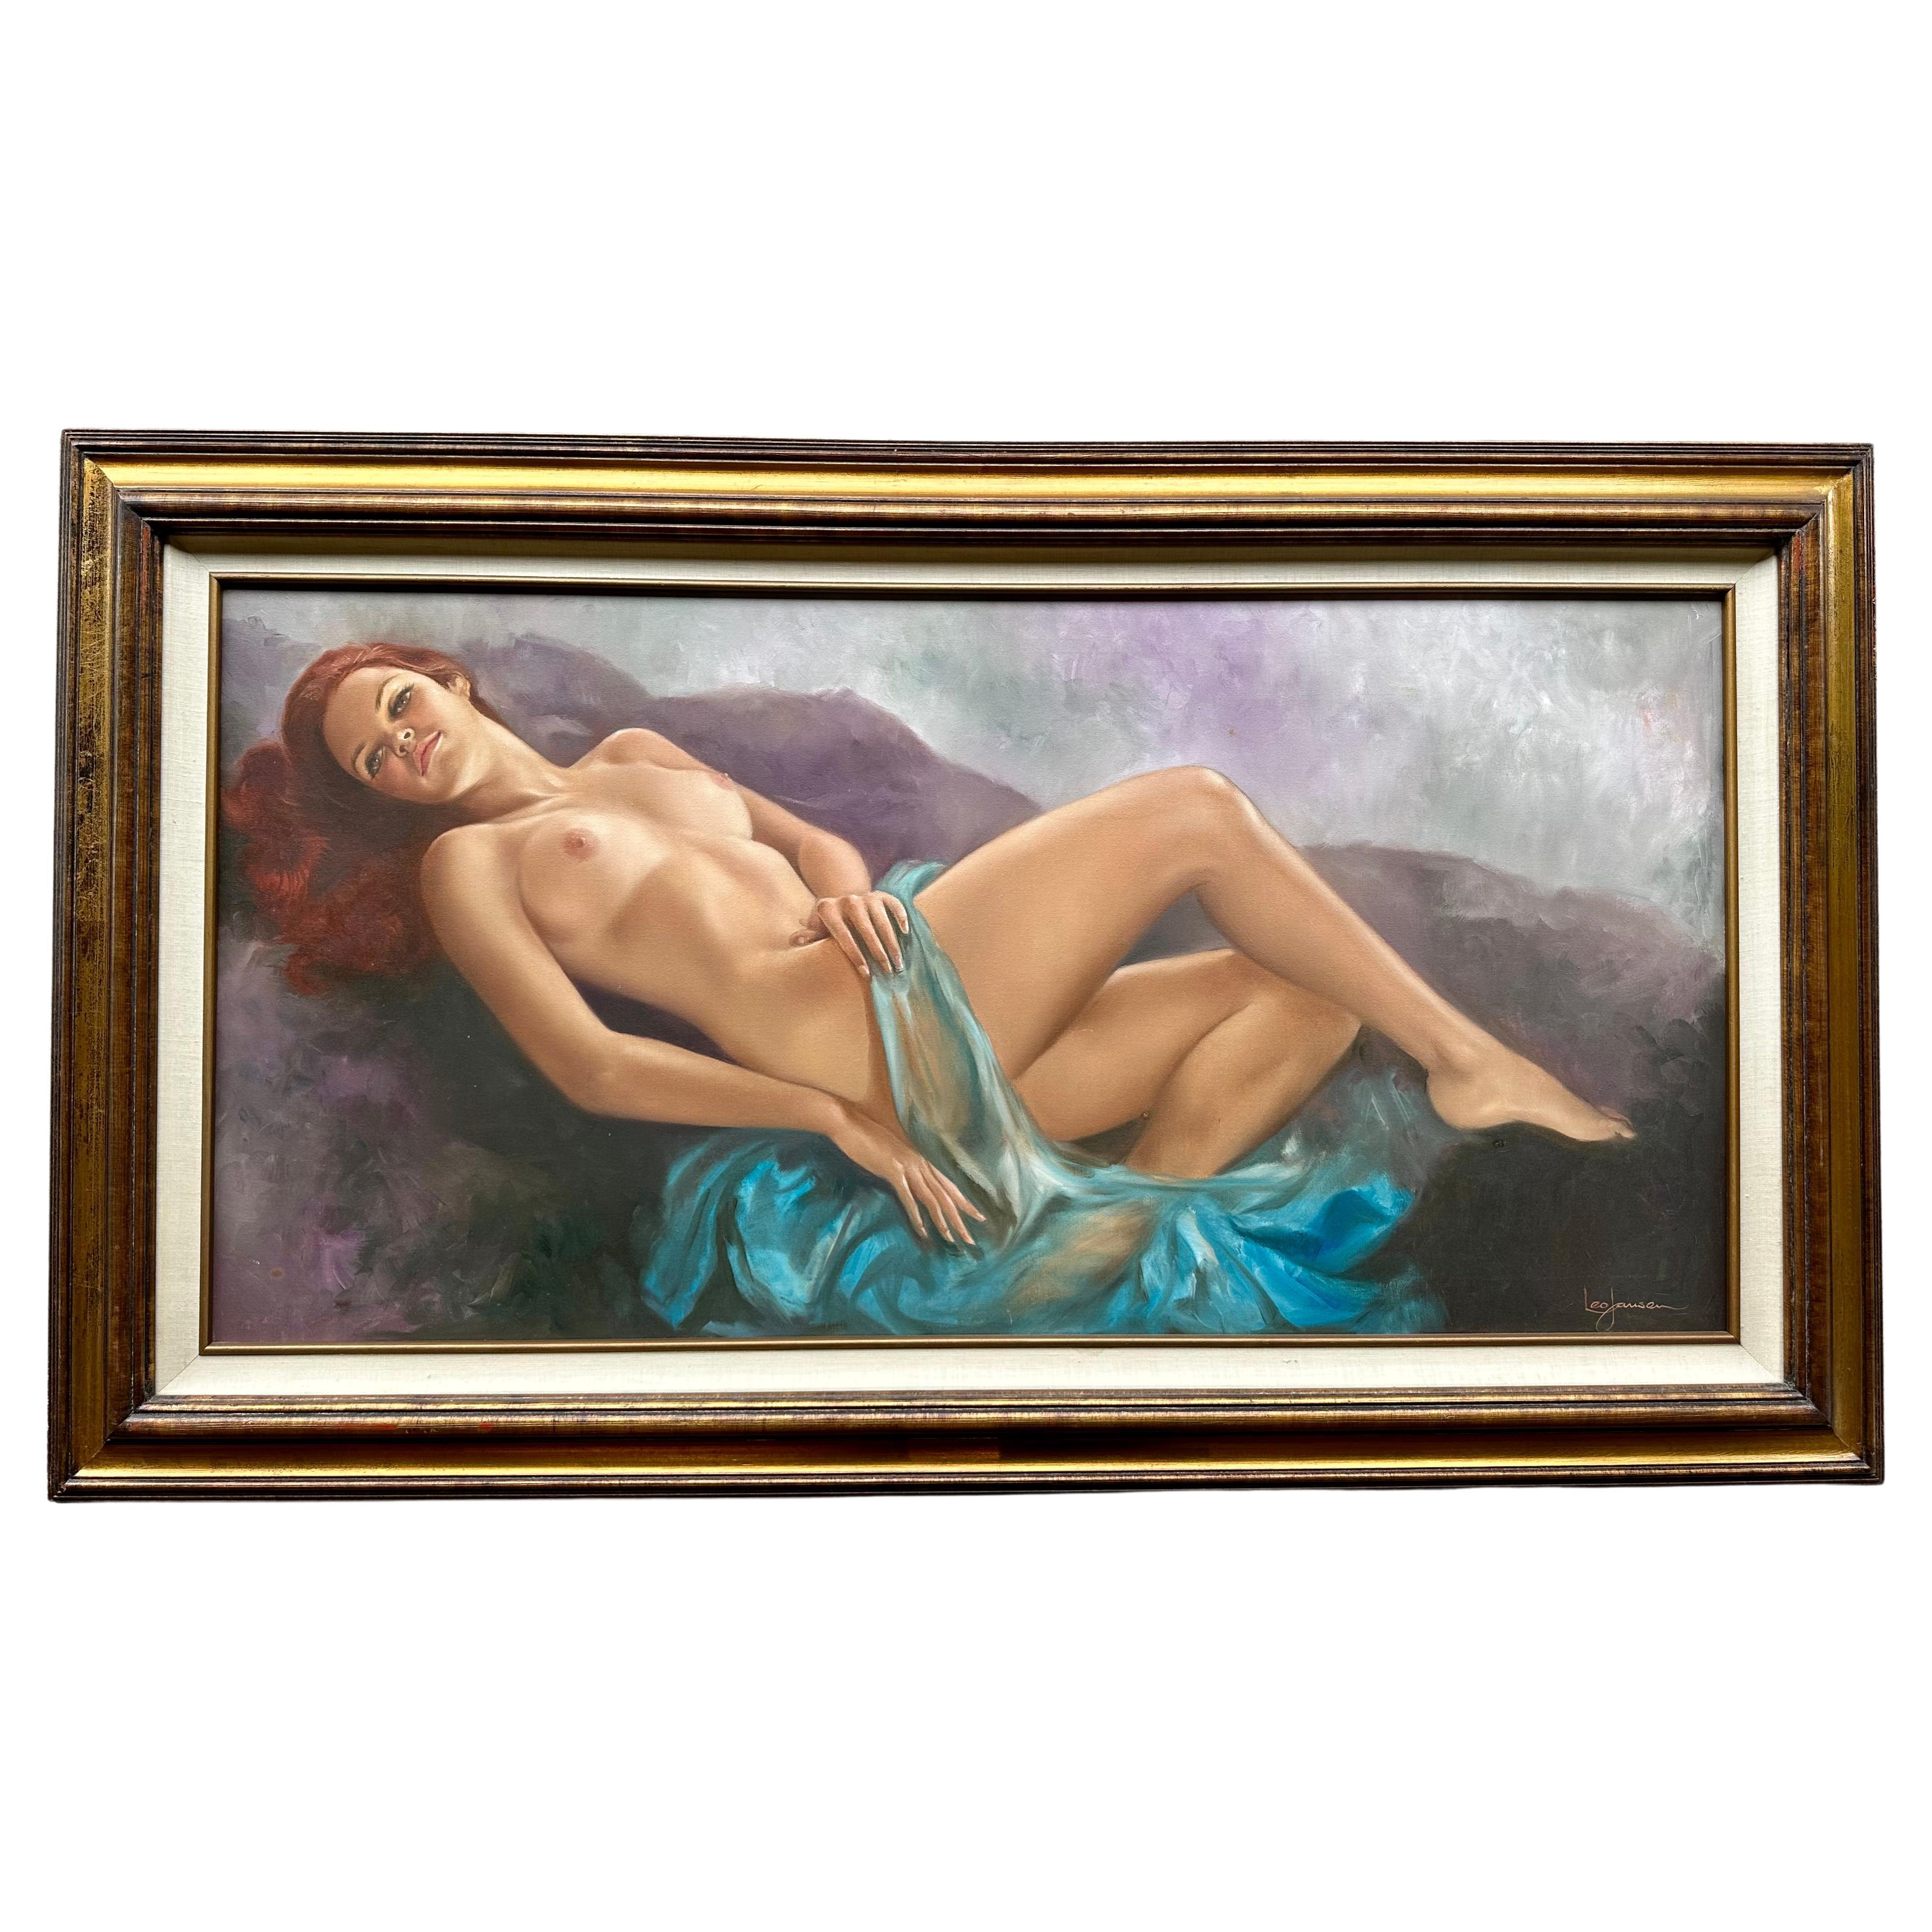 Very sensual, large original oil on canvas of a beautiful reclining red headed nude woman, by famous deceased listed Dutch artist, Leo Jansen (1930-1980). The billowy, cloud like, background in tones of purple, teal and gray adds softness and